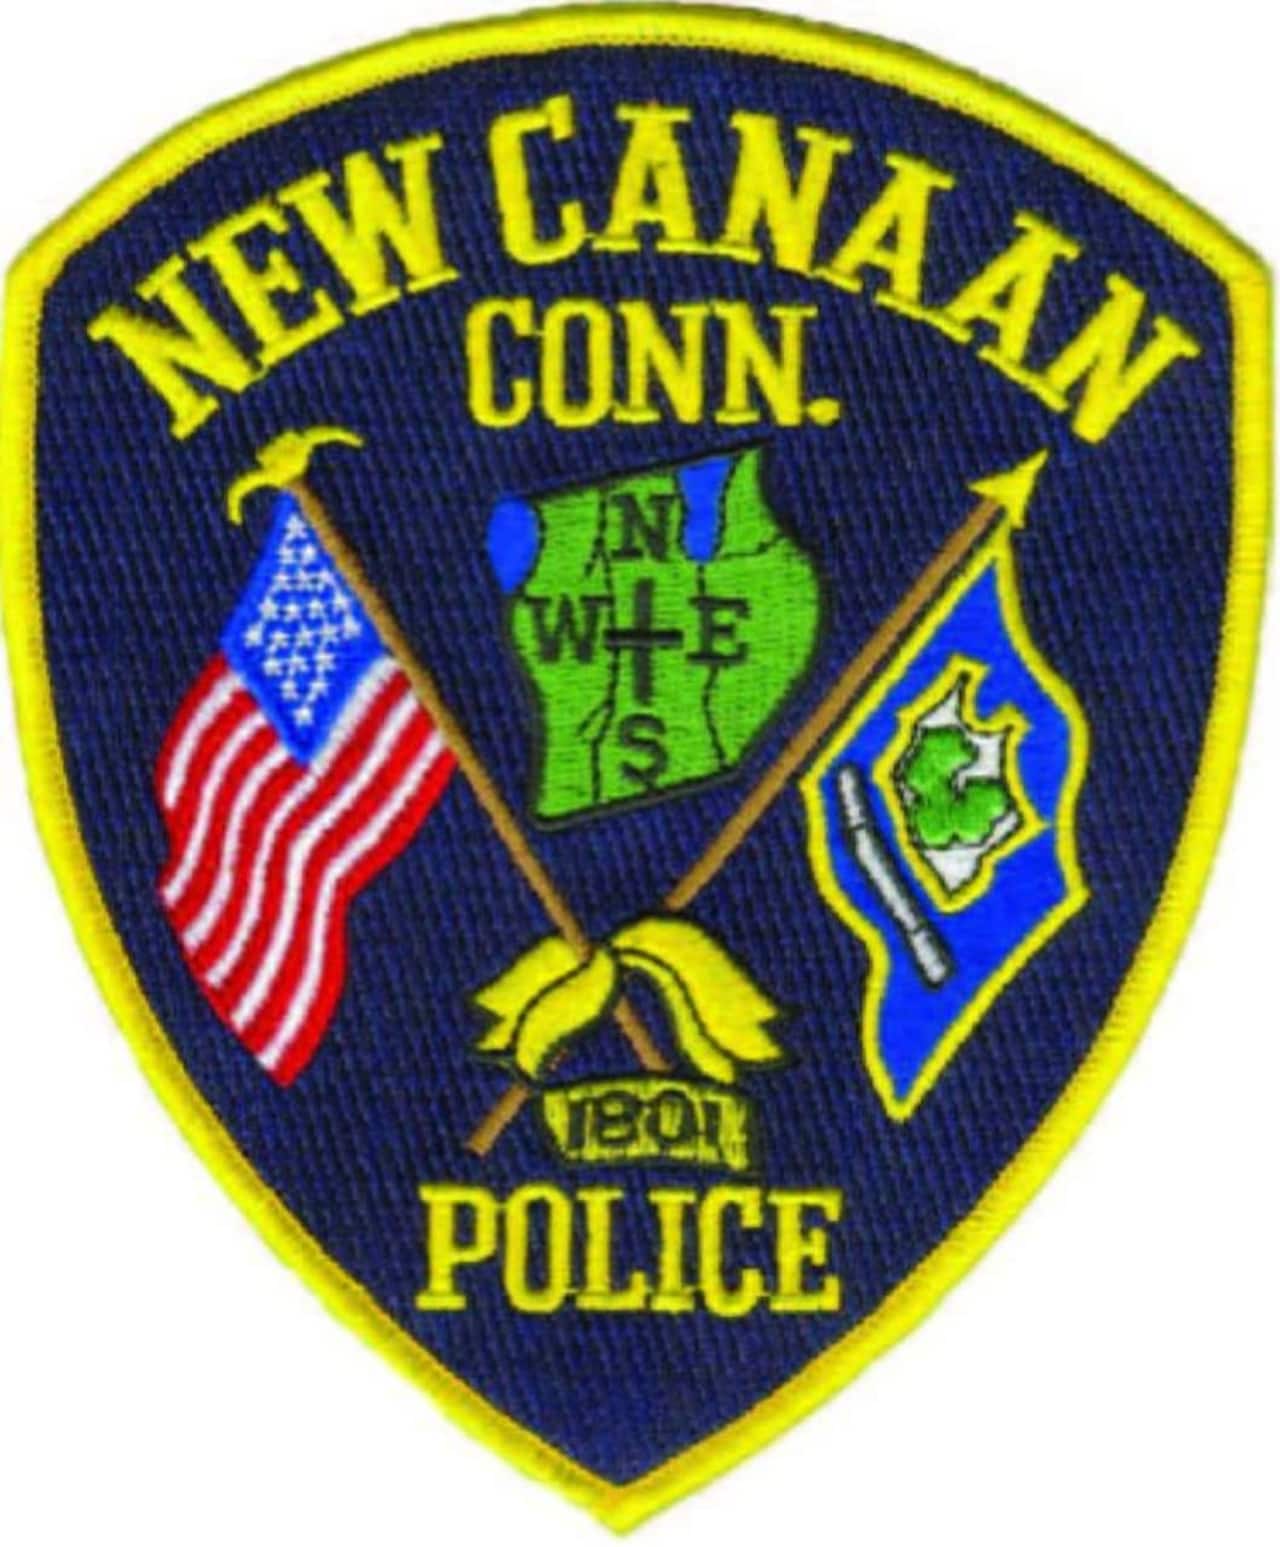 A home was broken into on Cedar Lane in New Canaan when someone forced their way in through the back door